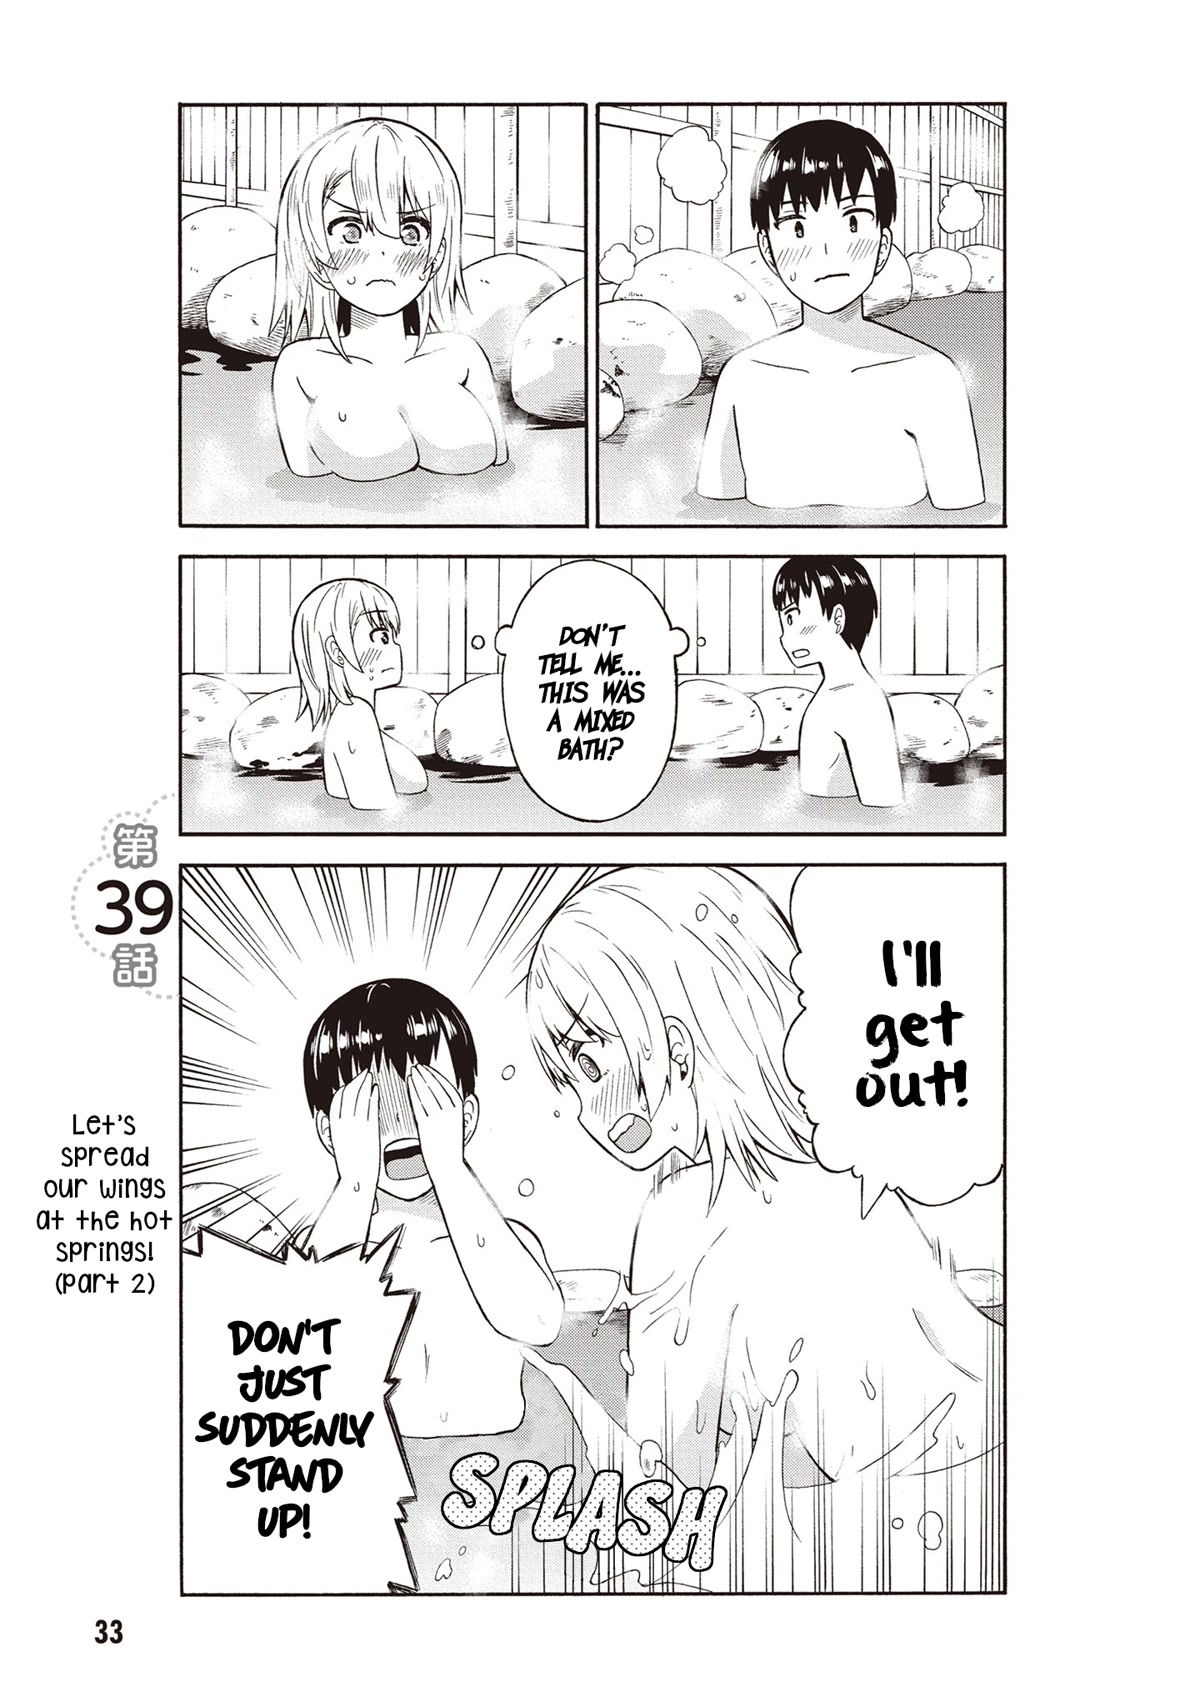 Usami-San Ha Kamawaretai! Chapter 39: Let's Spread Our Wings At The Hot Springs! (Part 2) - Picture 1